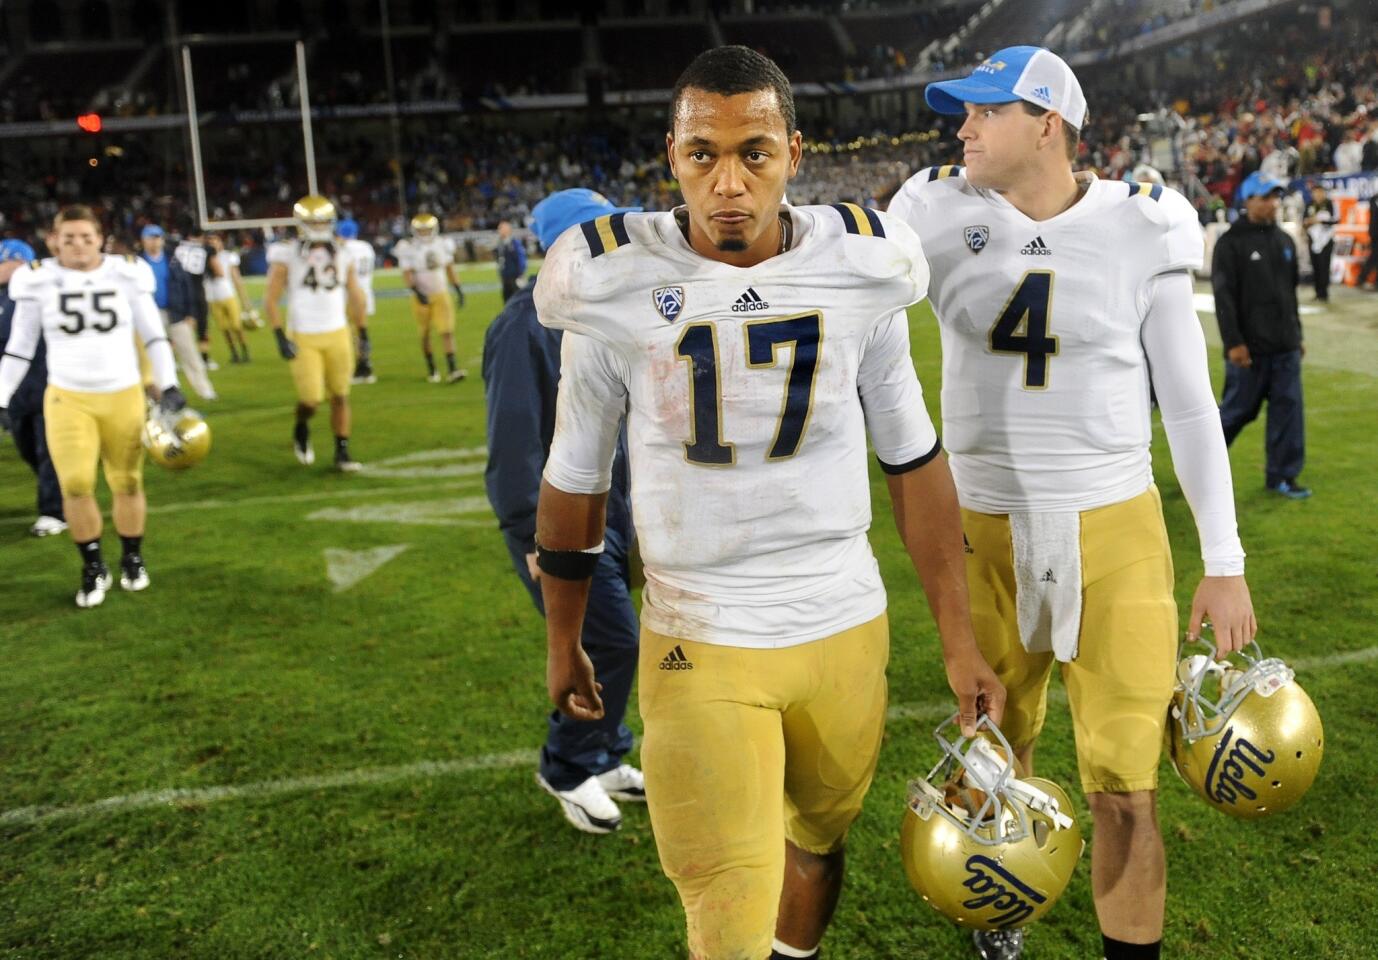 Bruins quarterback Brett Hundley walks off the Stanford Stadium field ahead of reserve quarterback Kevin Prince after a 27-24 loss to the Cardinal on Friday night.